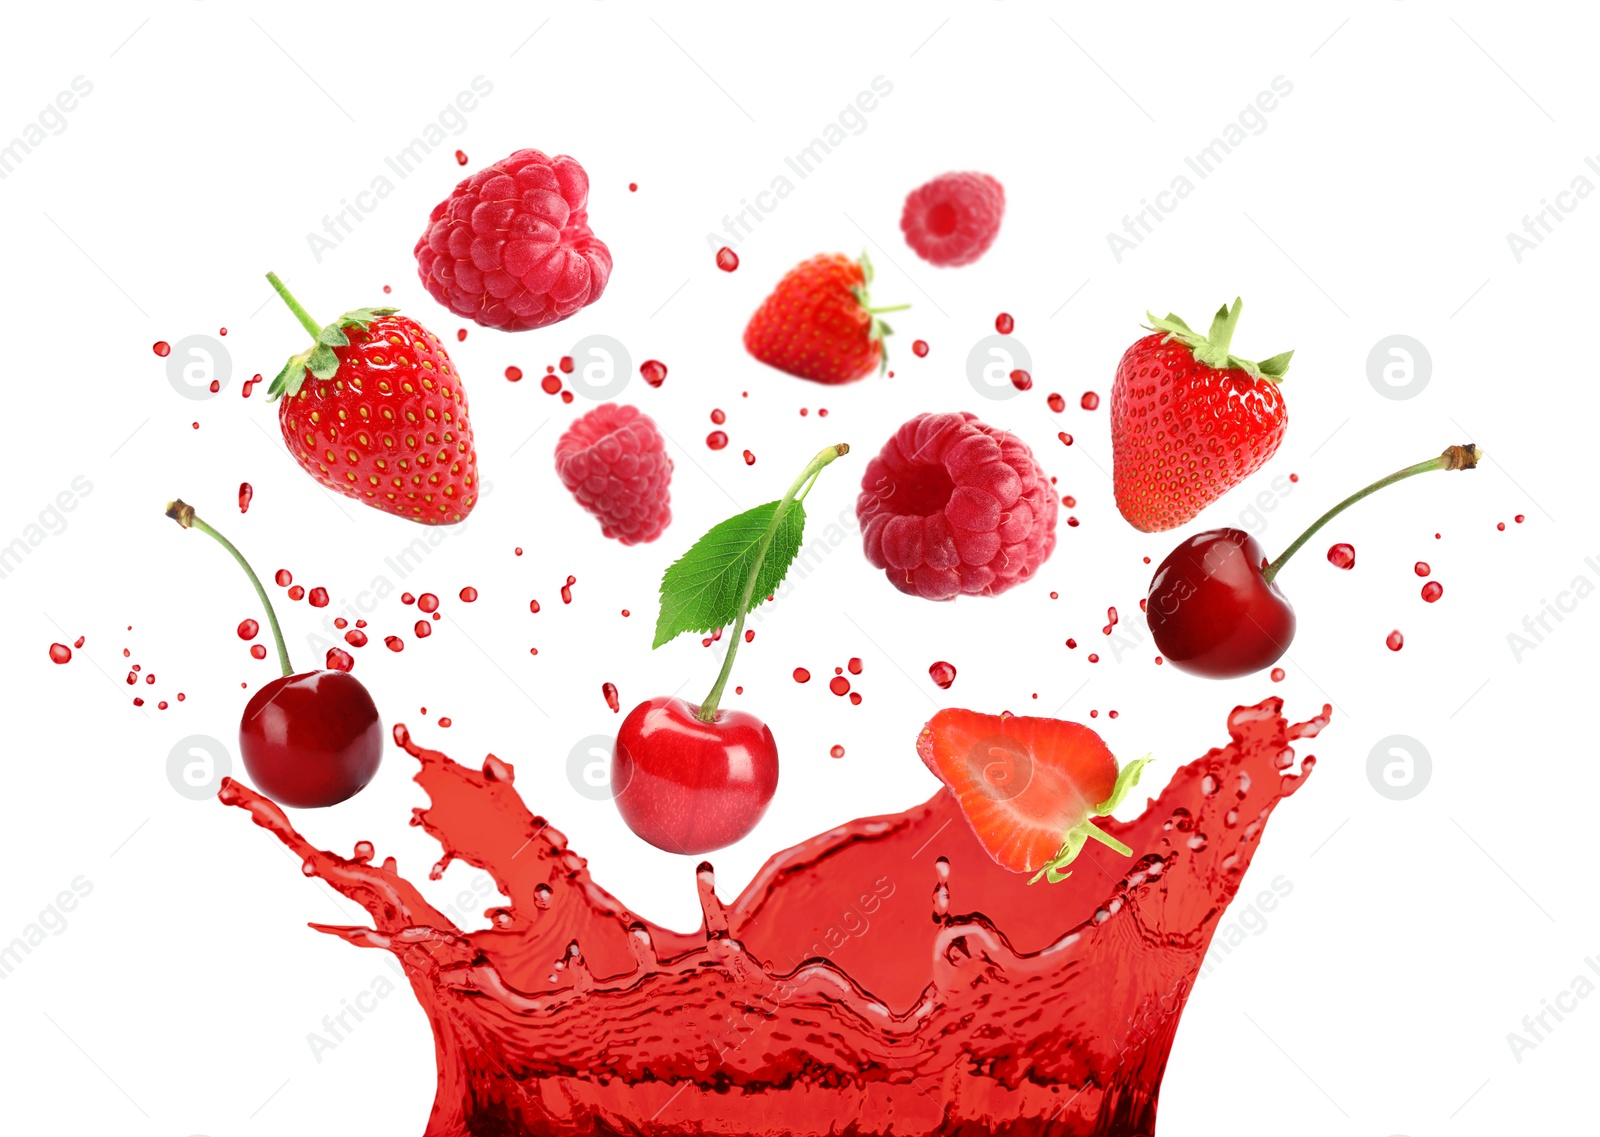 Image of Delicious ripe berries falling in juice with splashes on white background